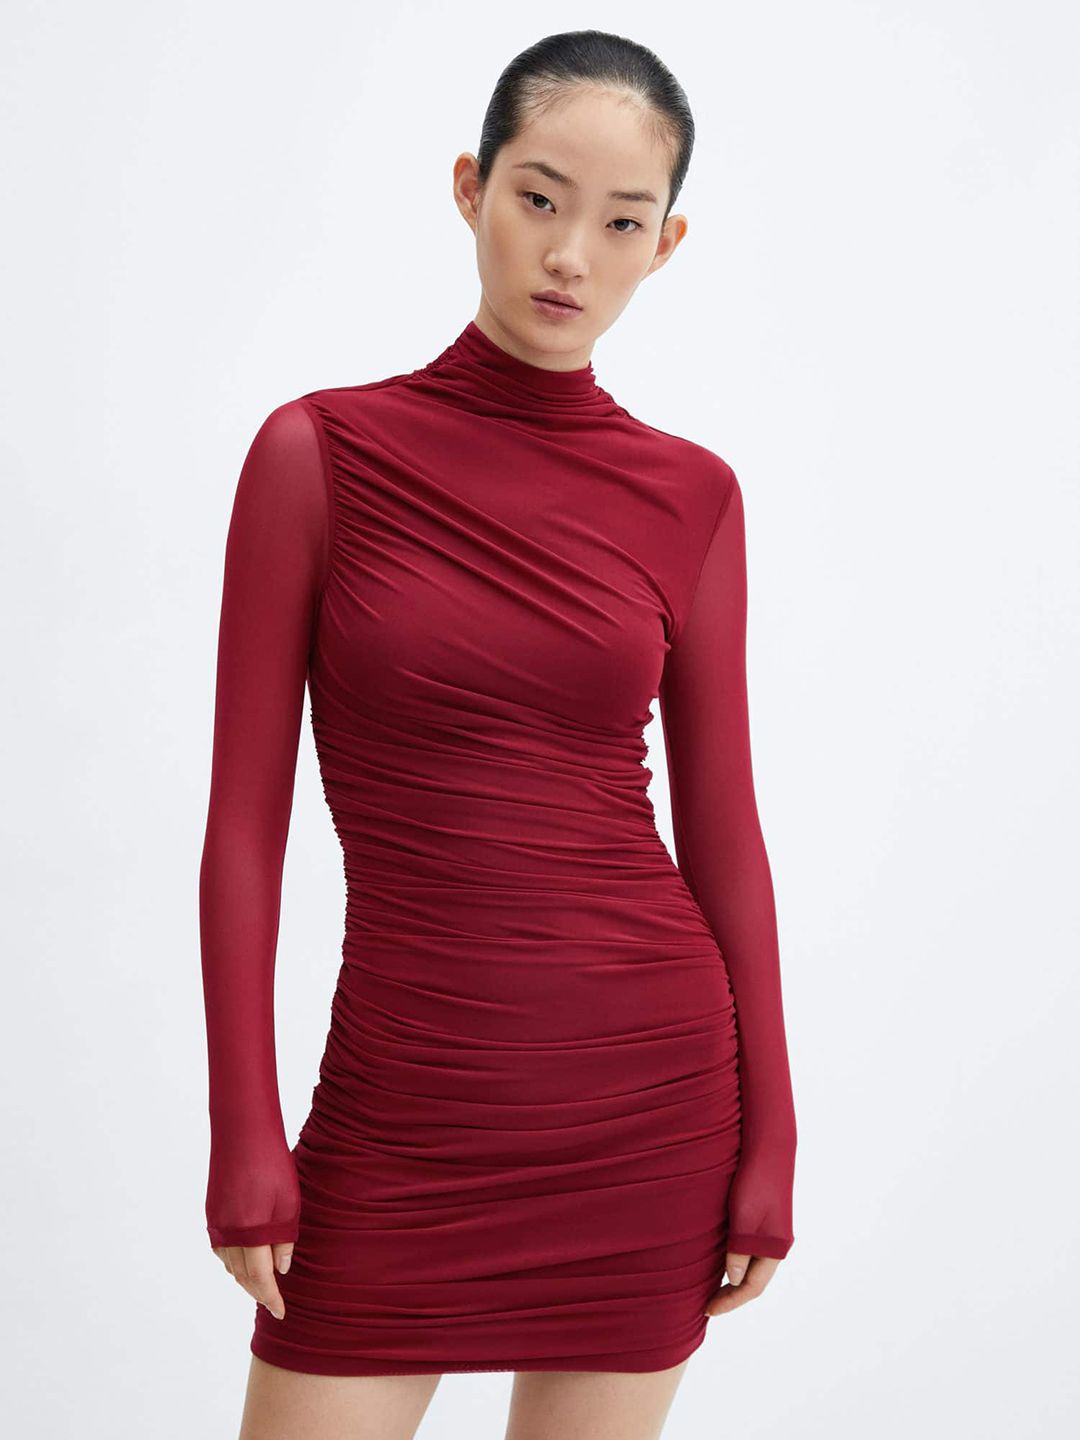 Shop Red Slit Satin dress Online India for women -Labelbyanuja -  Labelbyanuja